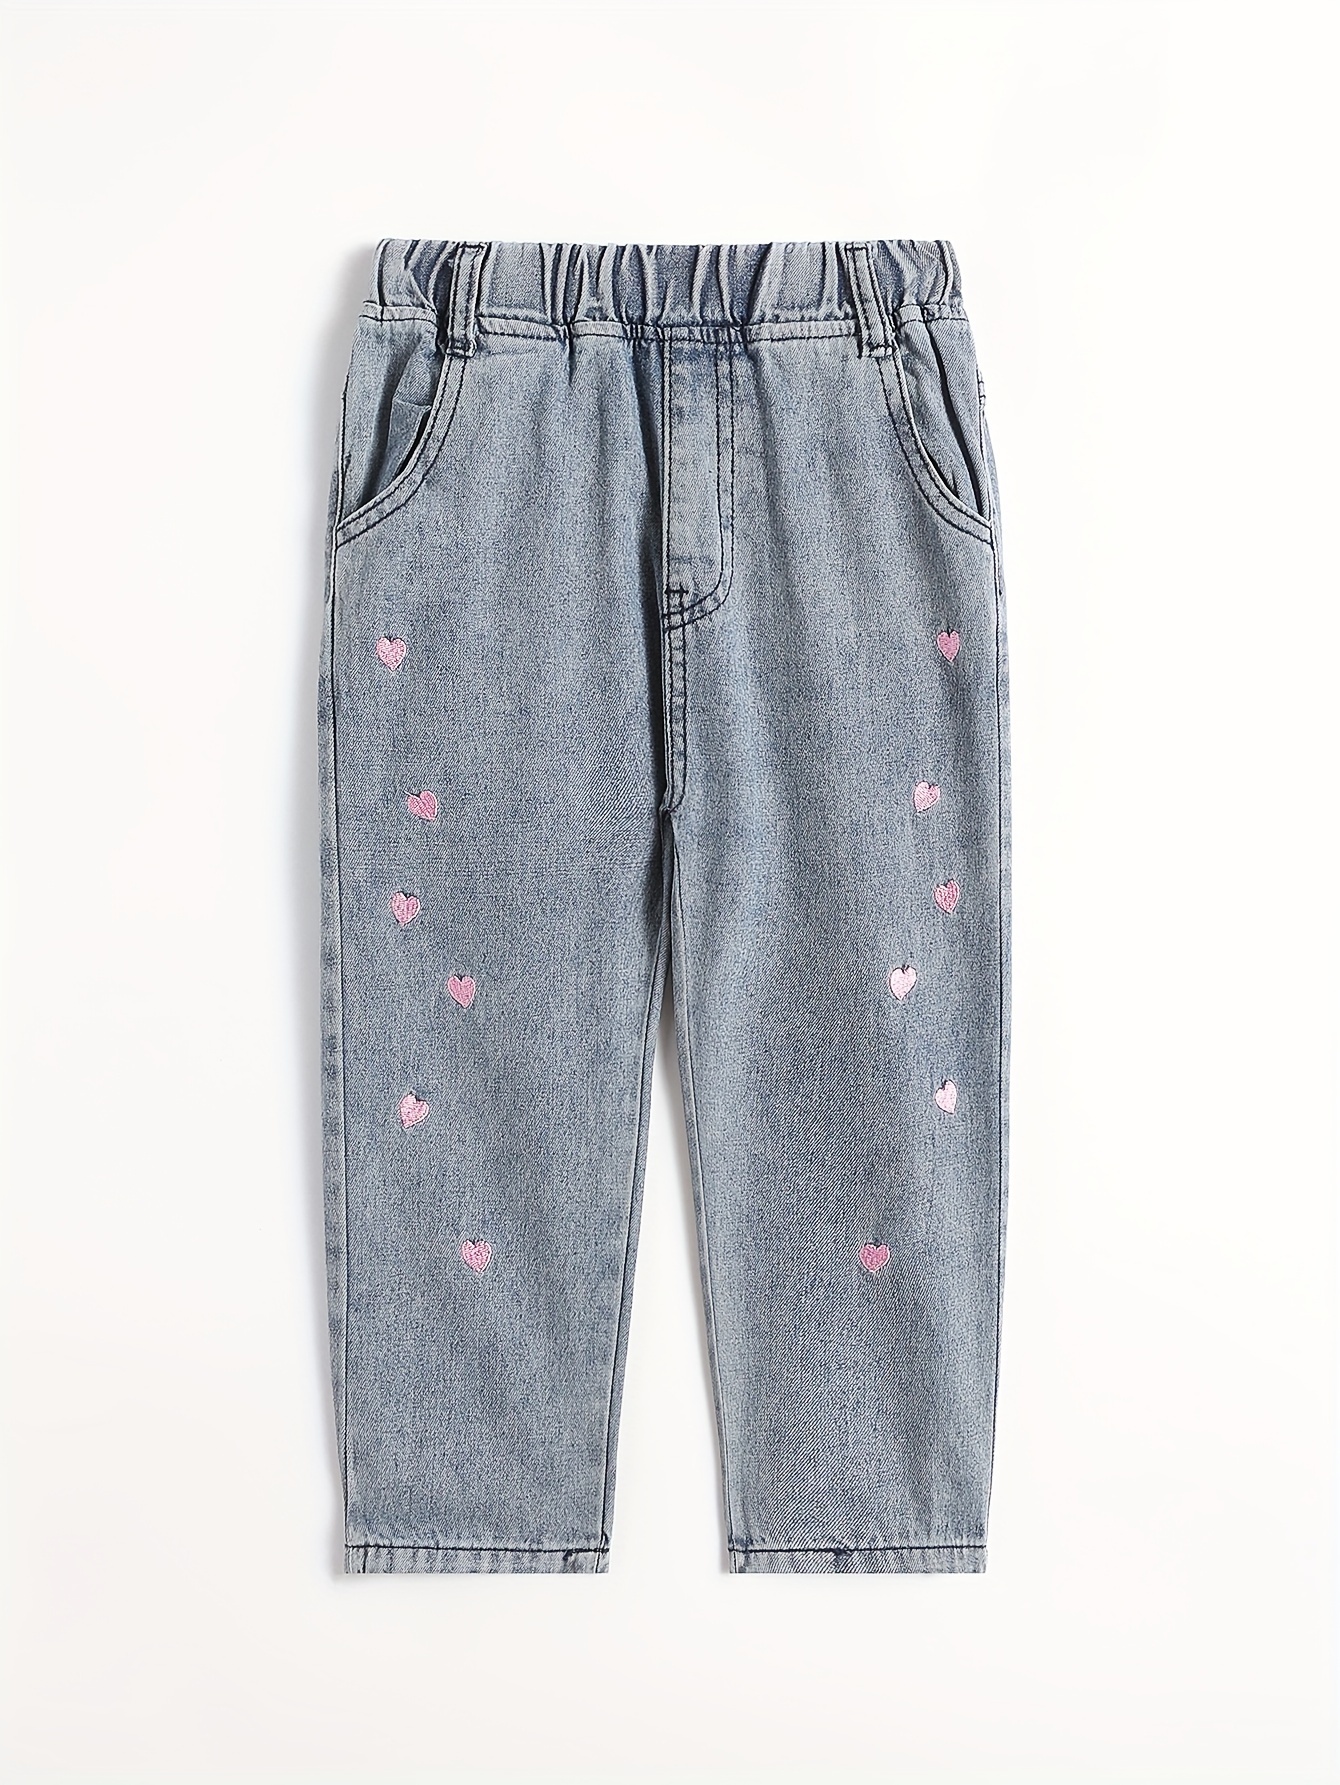 Girls Heart Embroidered Jeans Casual Denim Wide Leg Pants Kids Spring  Summer Clothes